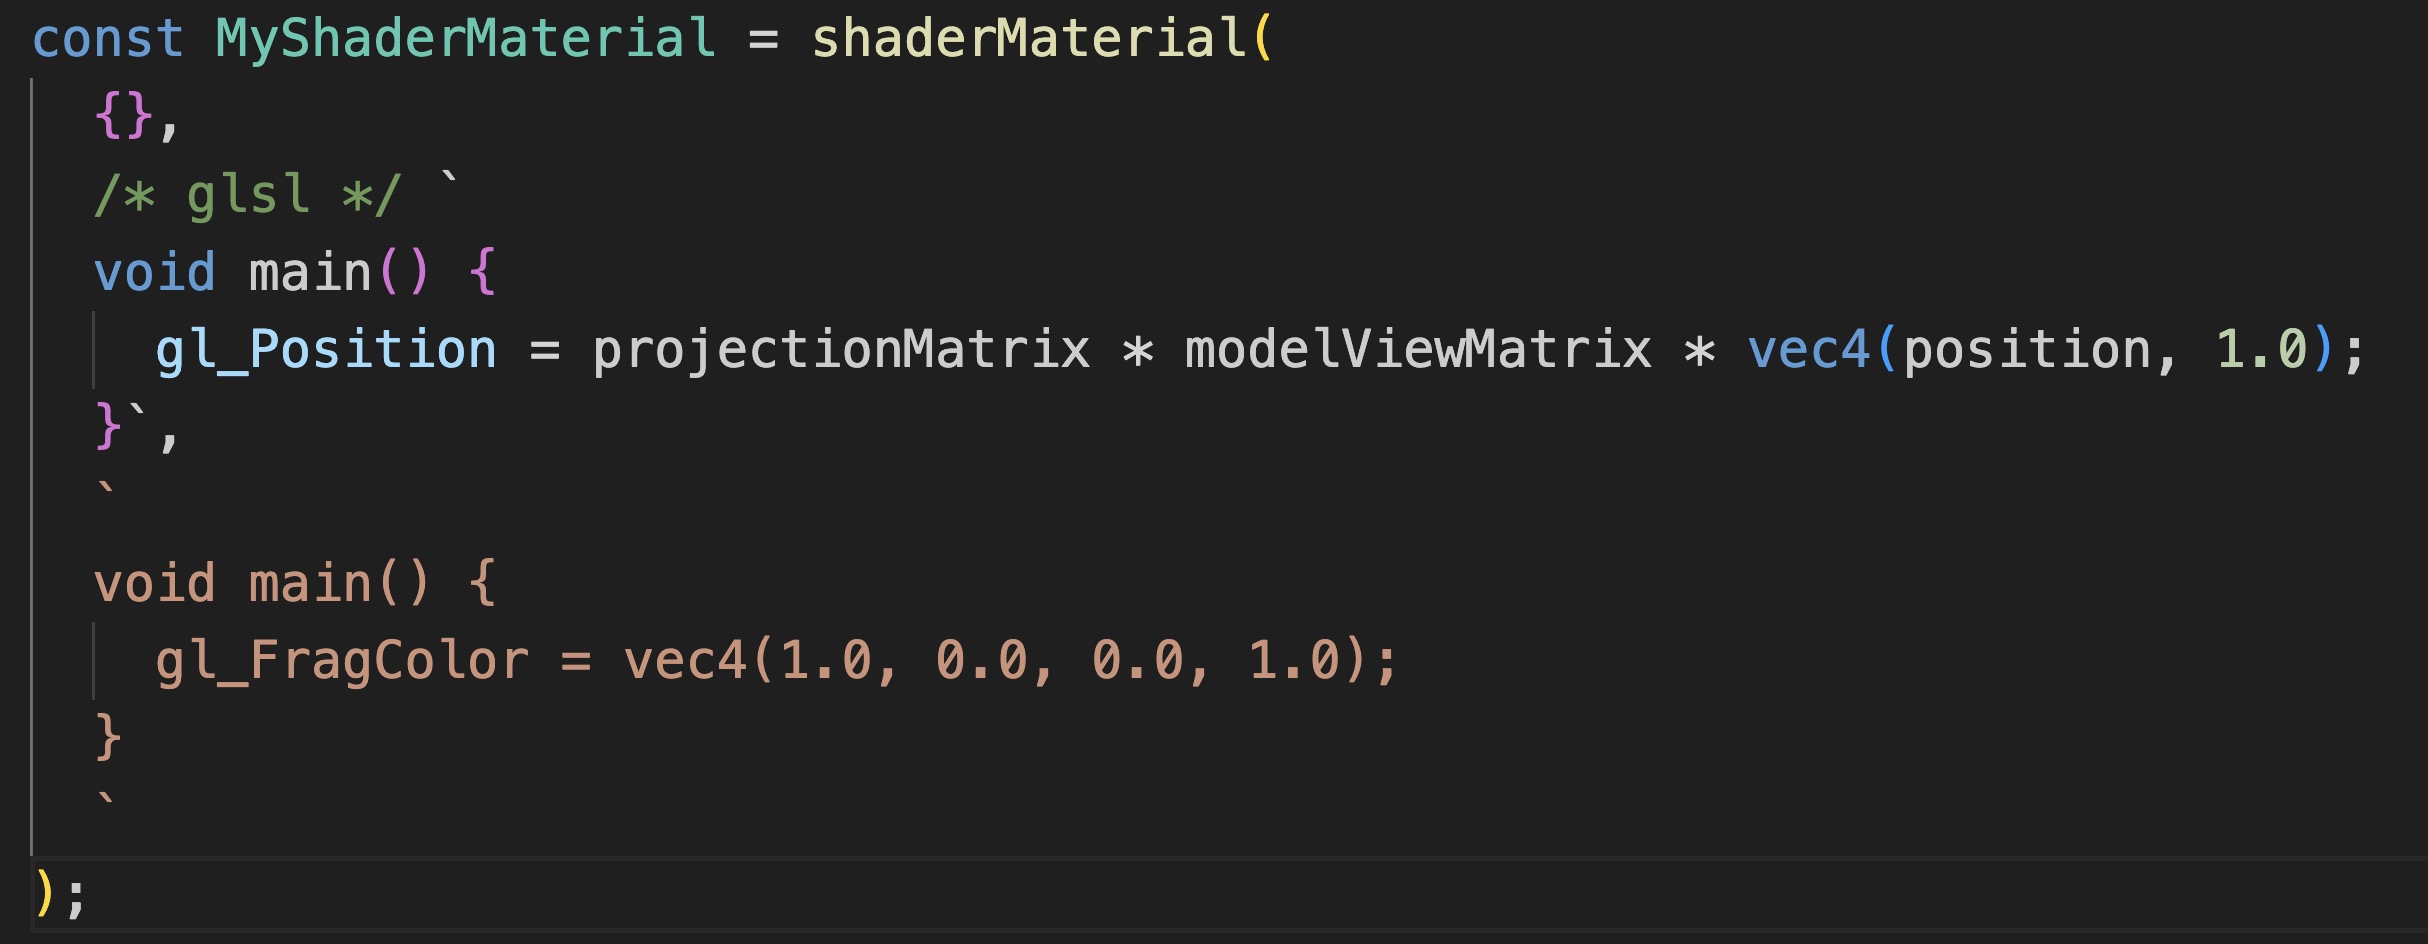 GLSL syntax highlighter in action